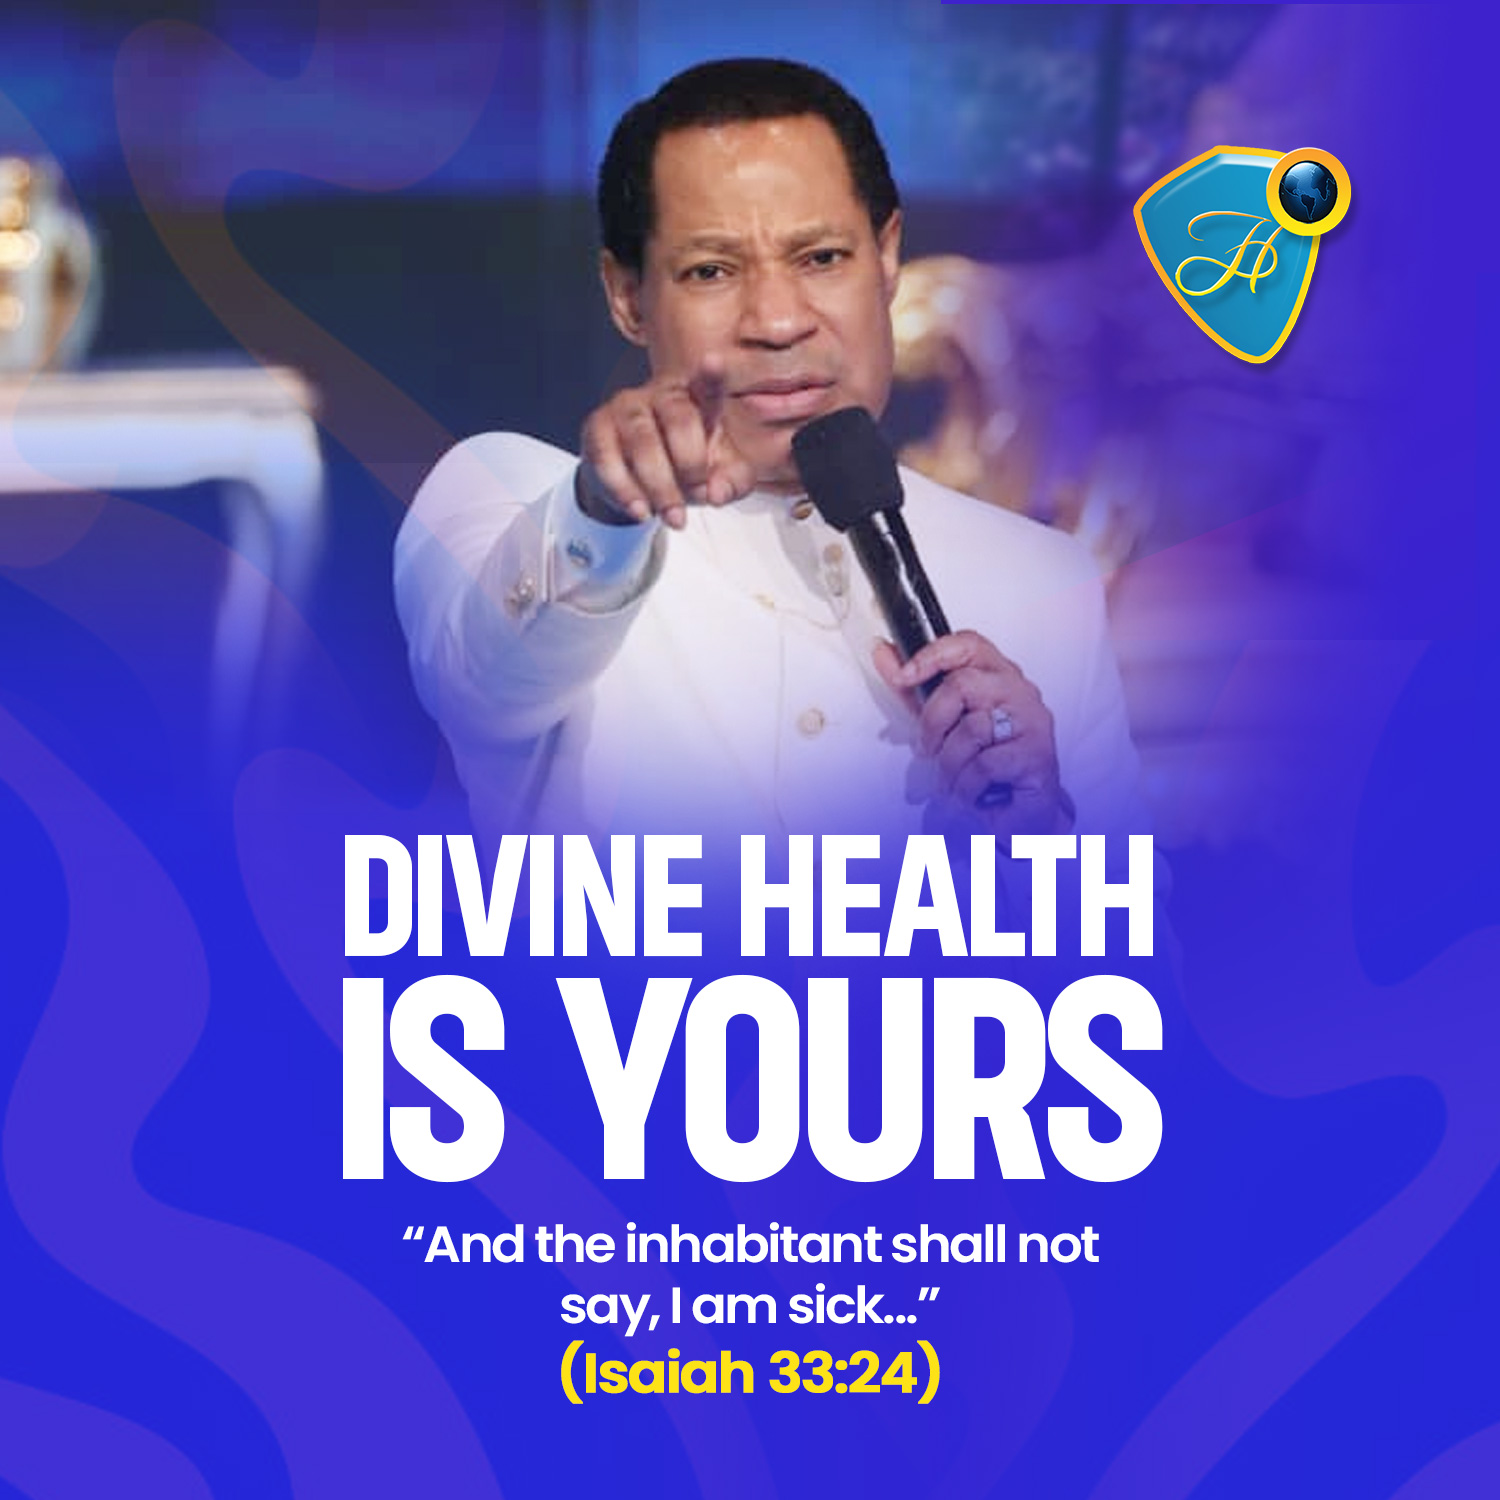 DIVINE HEALTH IS YOURS